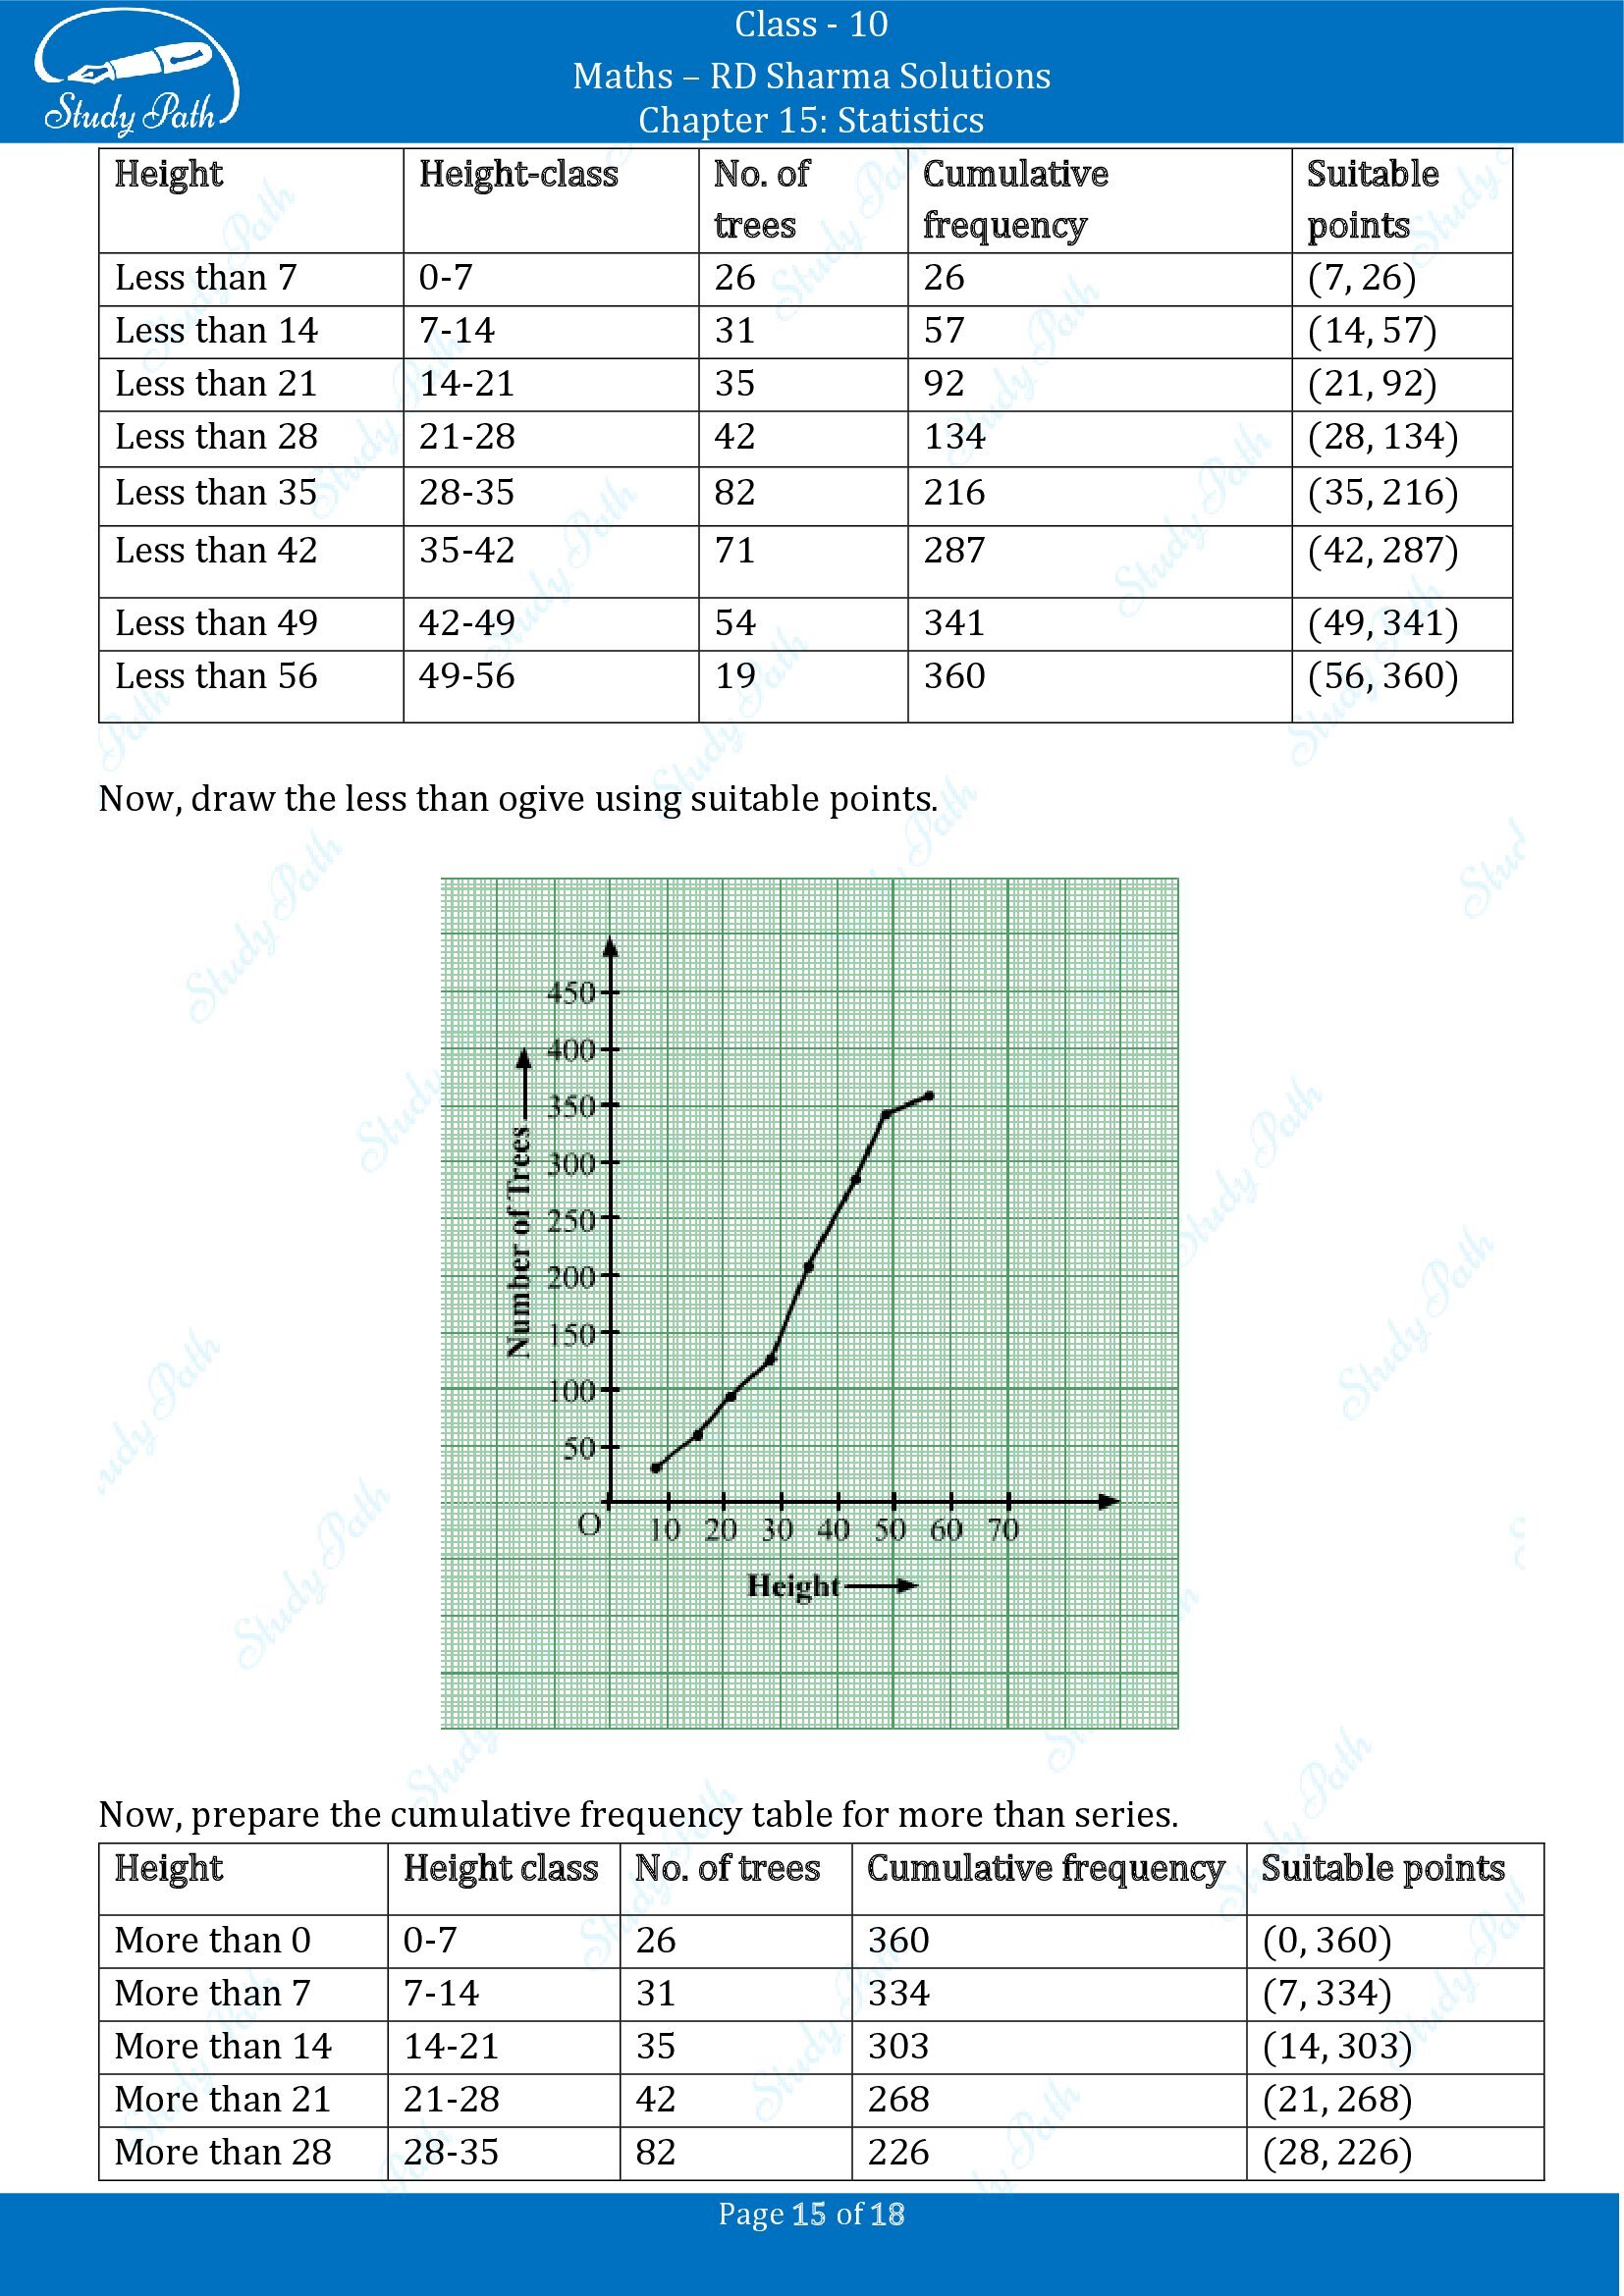 RD Sharma Solutions Class 10 Chapter 15 Statistics Exercise 15.6 00015